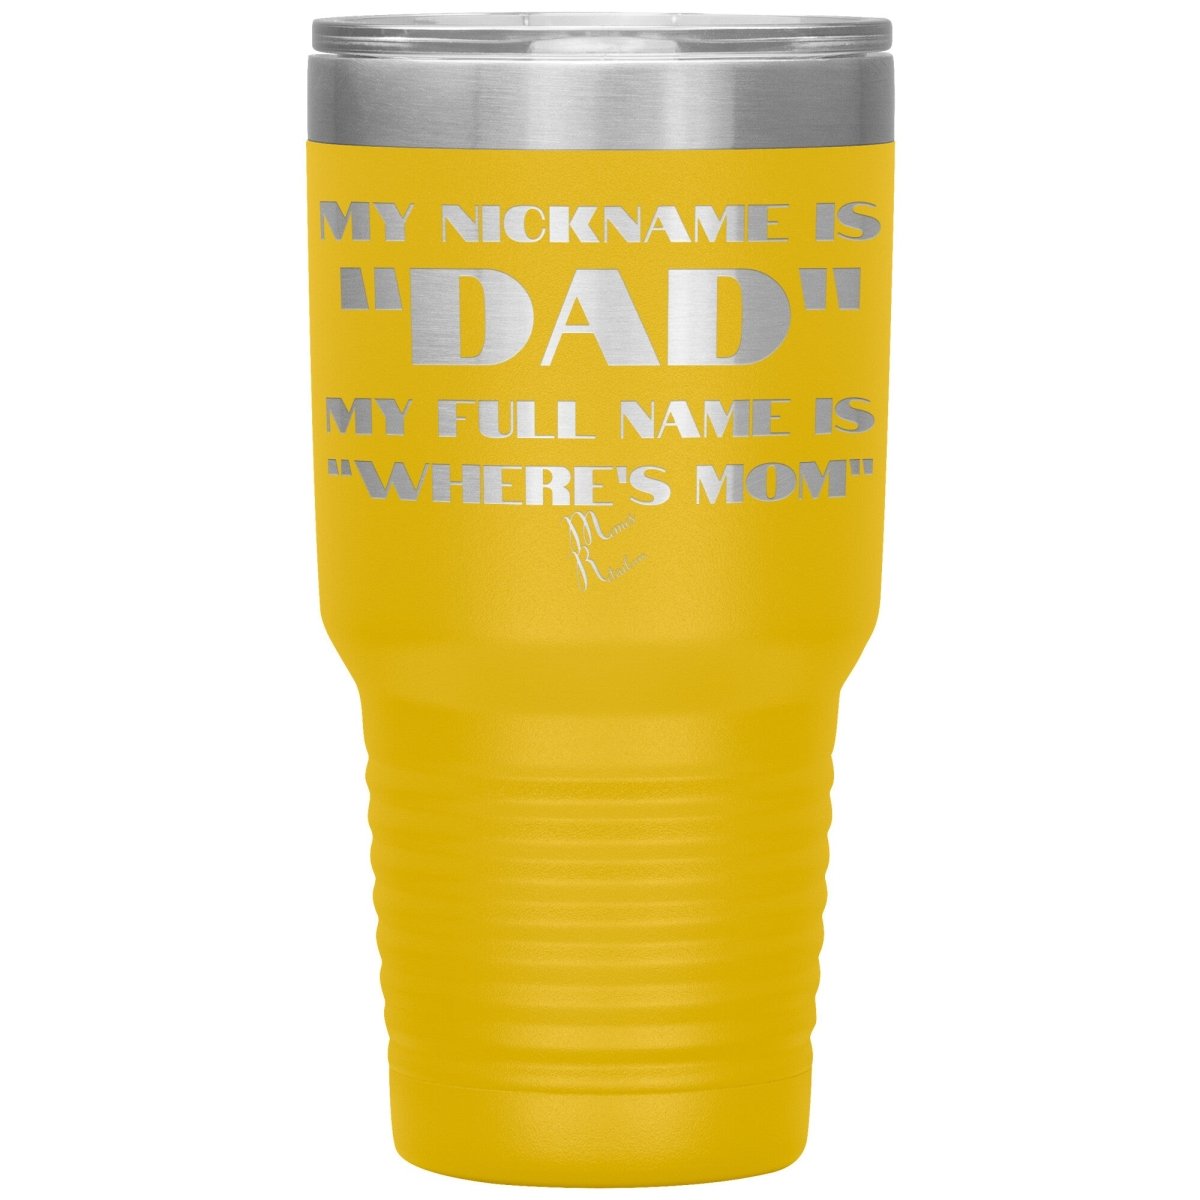 My Nickname is "Dad", My Full Name is "Where's Mom" Tumblers, 30oz Insulated Tumbler / Yellow - MemesRetail.com